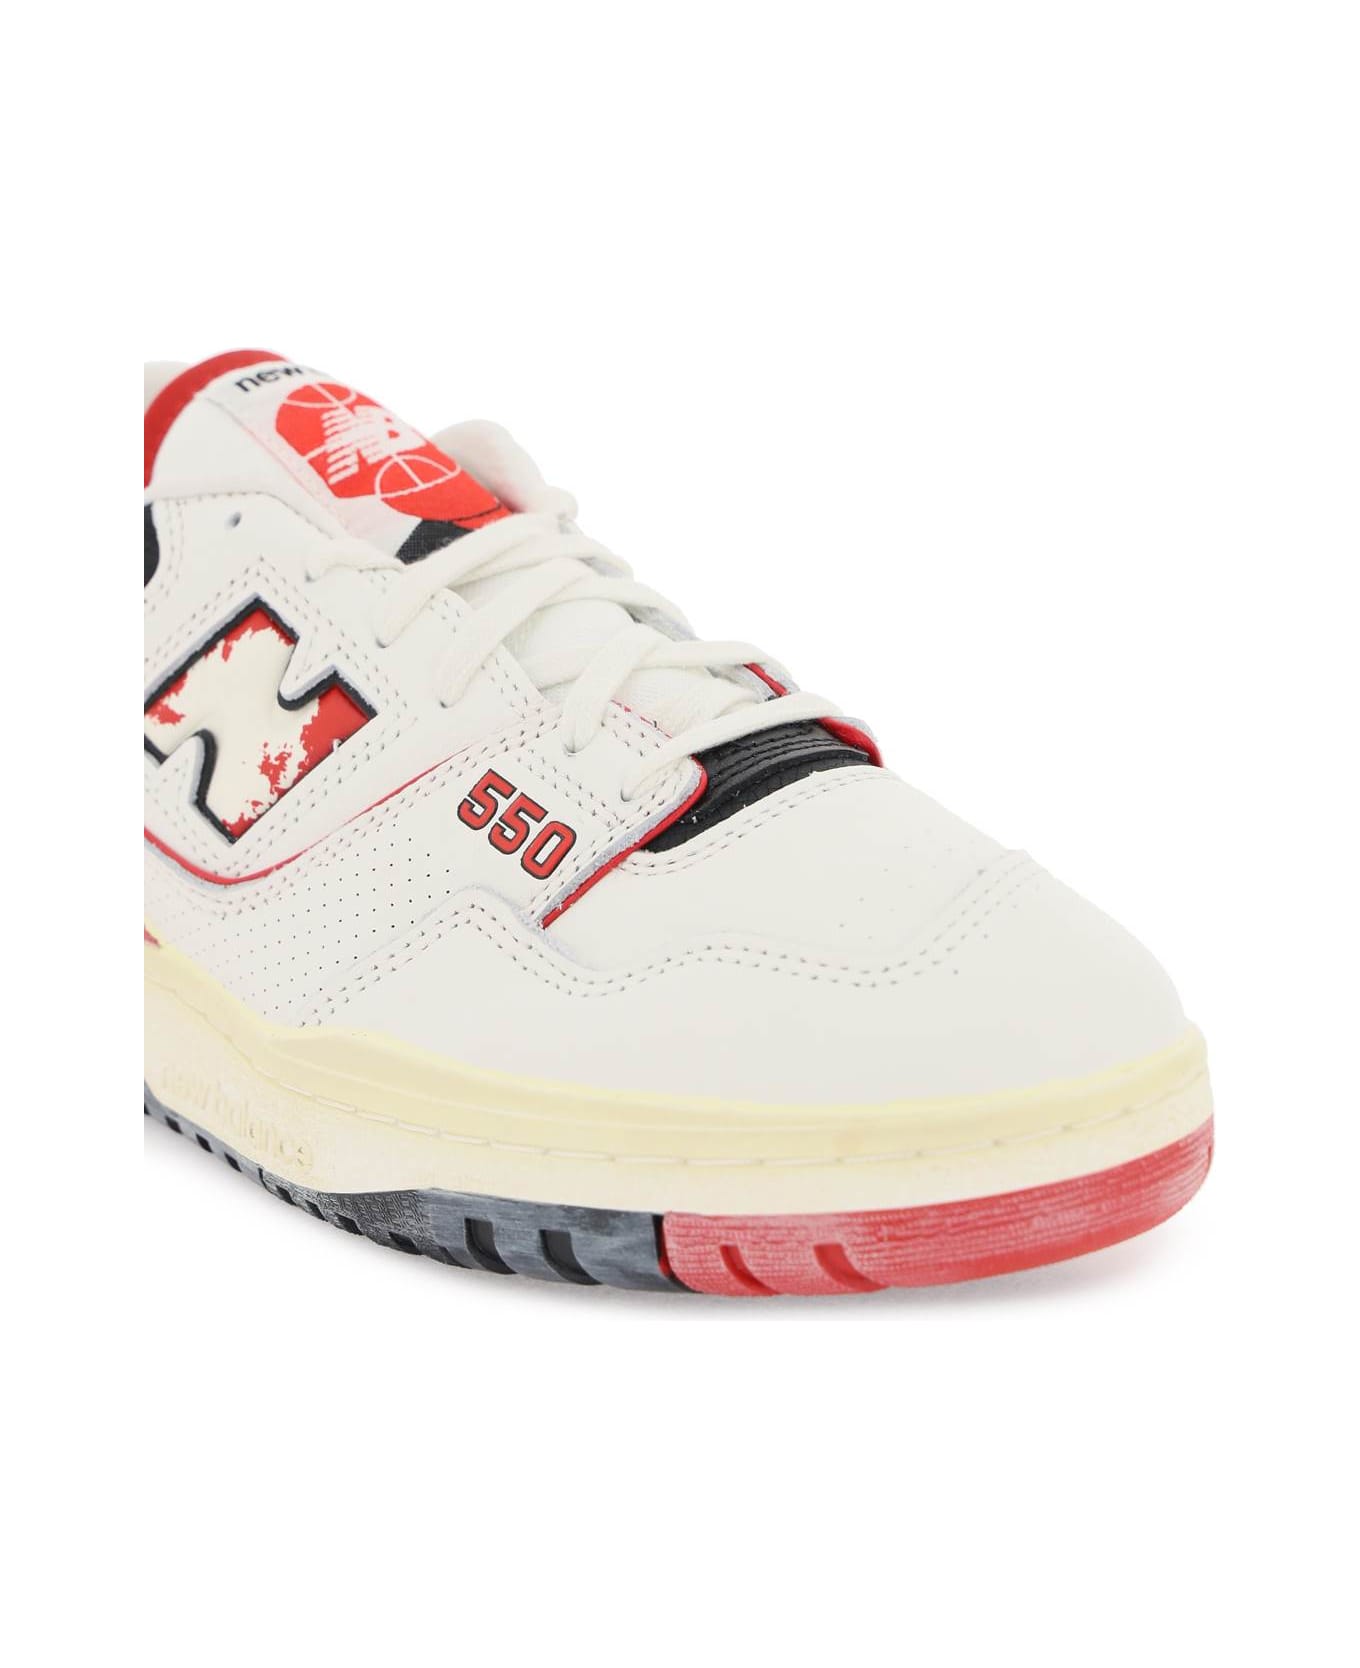 New Balance Vintage-effect 550 Sneakers - OFF WHITE RED (White)